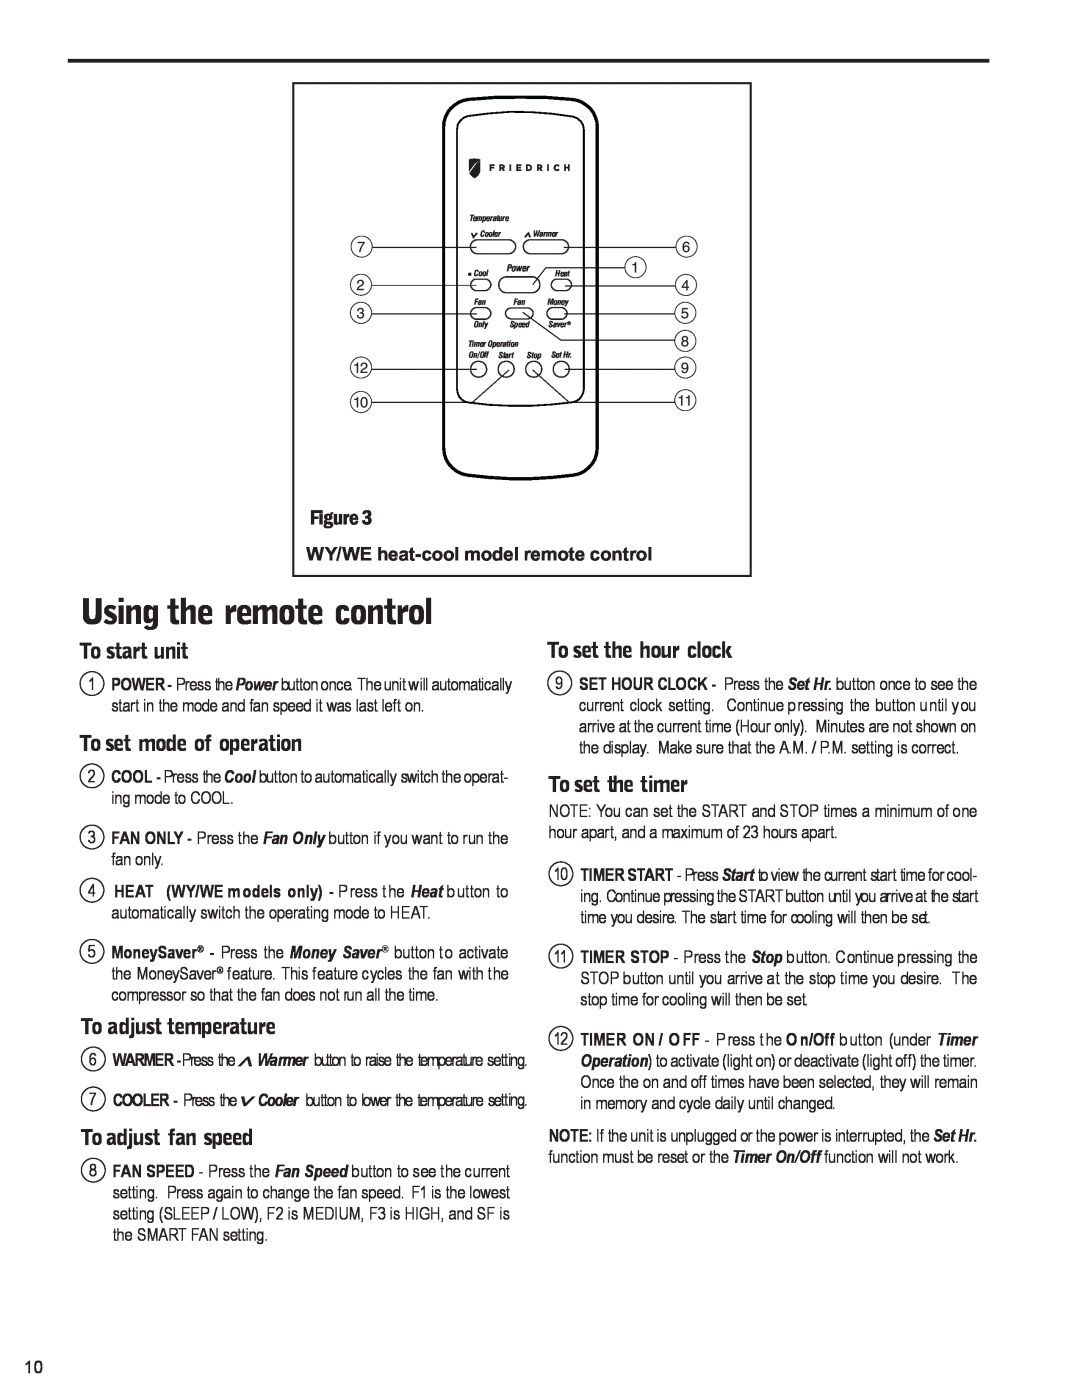 Friedrich WS10B10 service manual To start unit, To set mode of operation, To adjust temperature, Using the remote control 